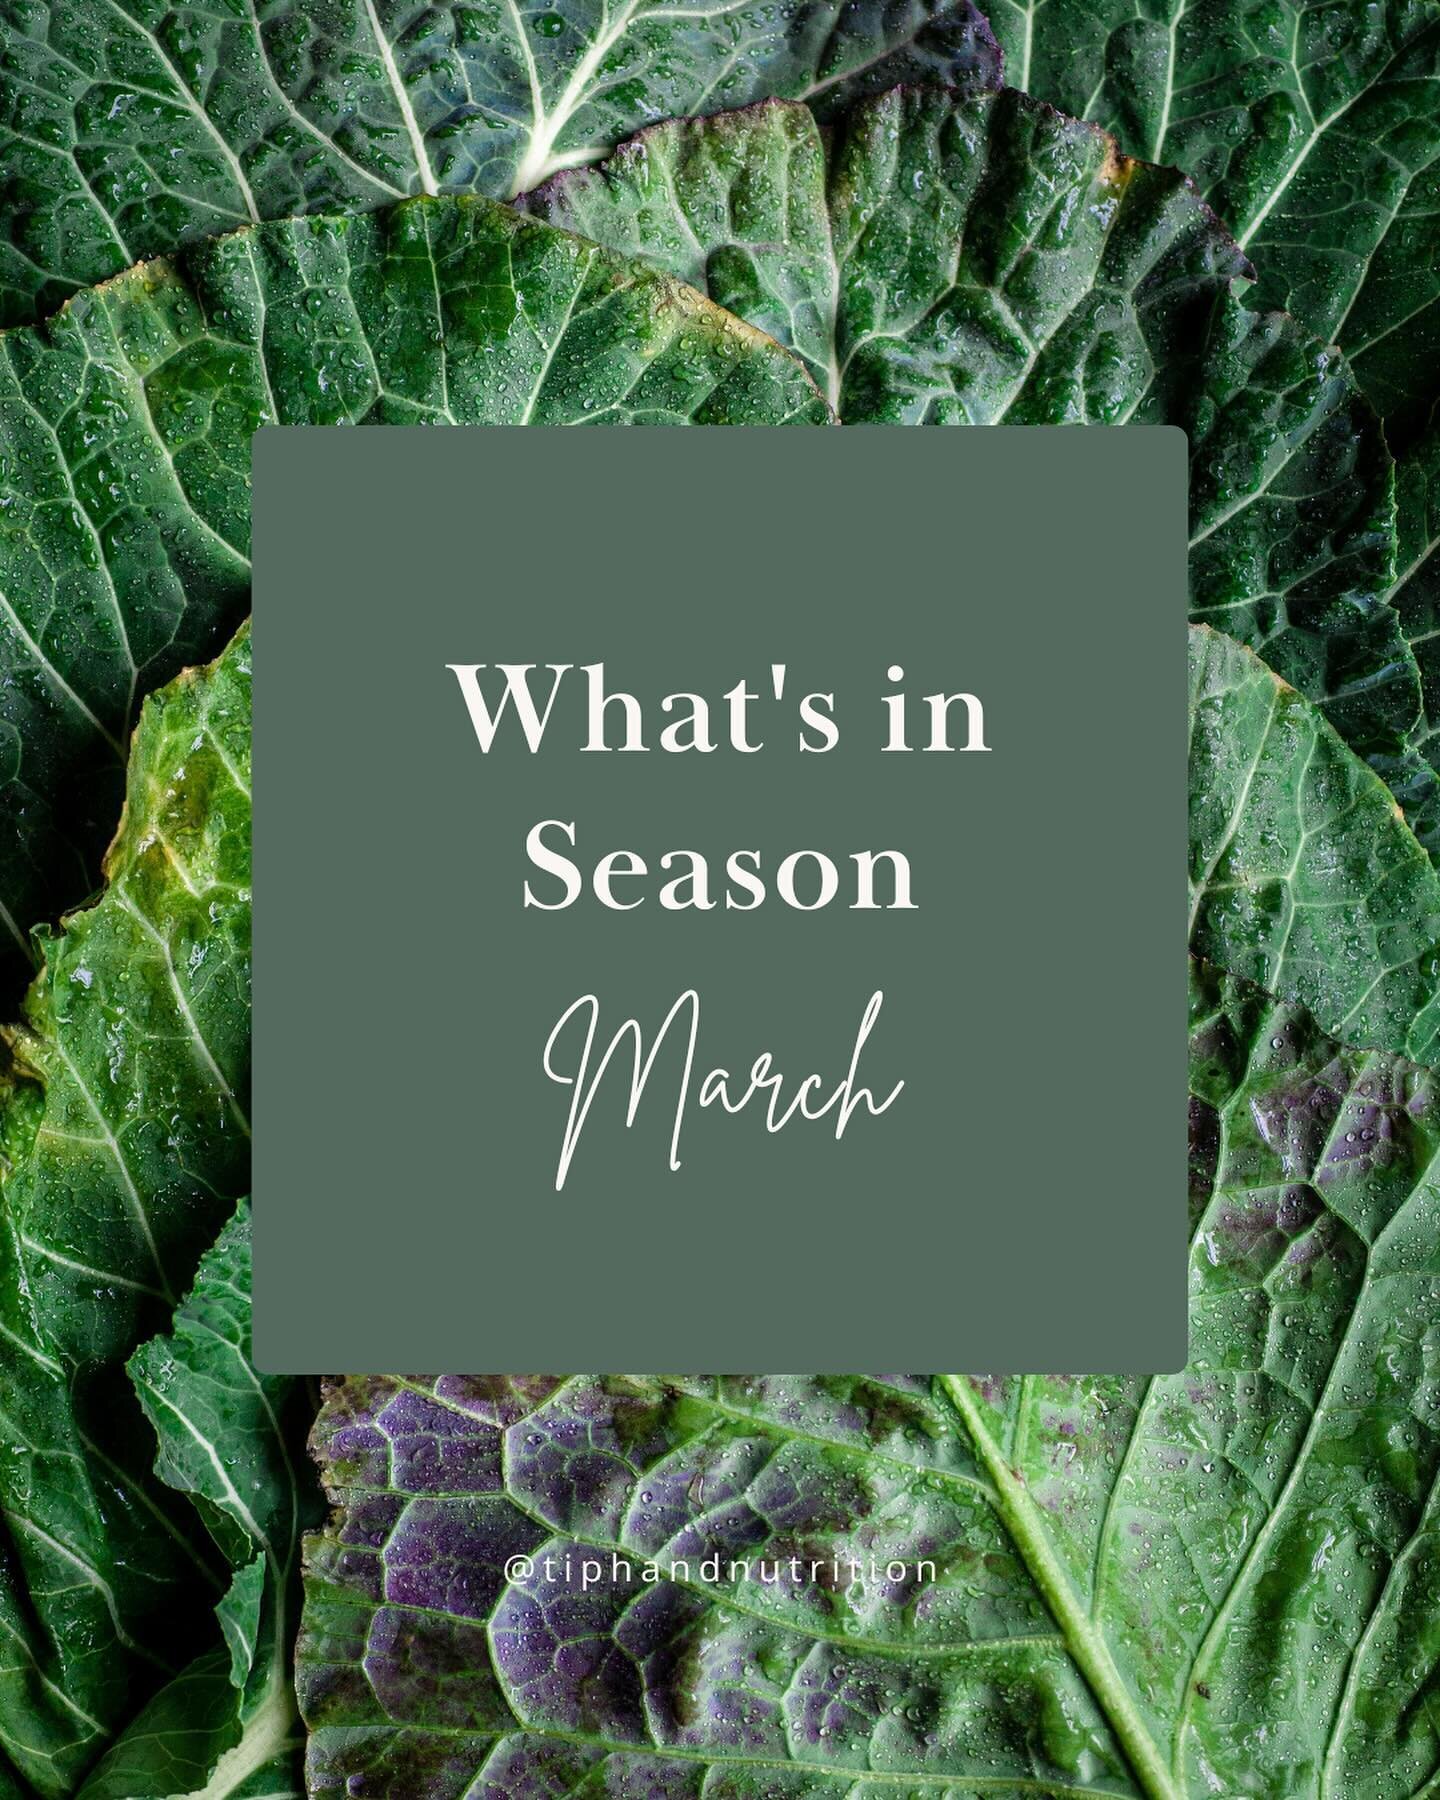 What&rsquo;s in season &hellip; March 🍎🍊🍋🥬🥕🍄🫘

Here are a few of the fruits and veg that are in season in March so you can save it for later when you are doing your shopping! 

There are many benefits to eating seasonal including (but not limi